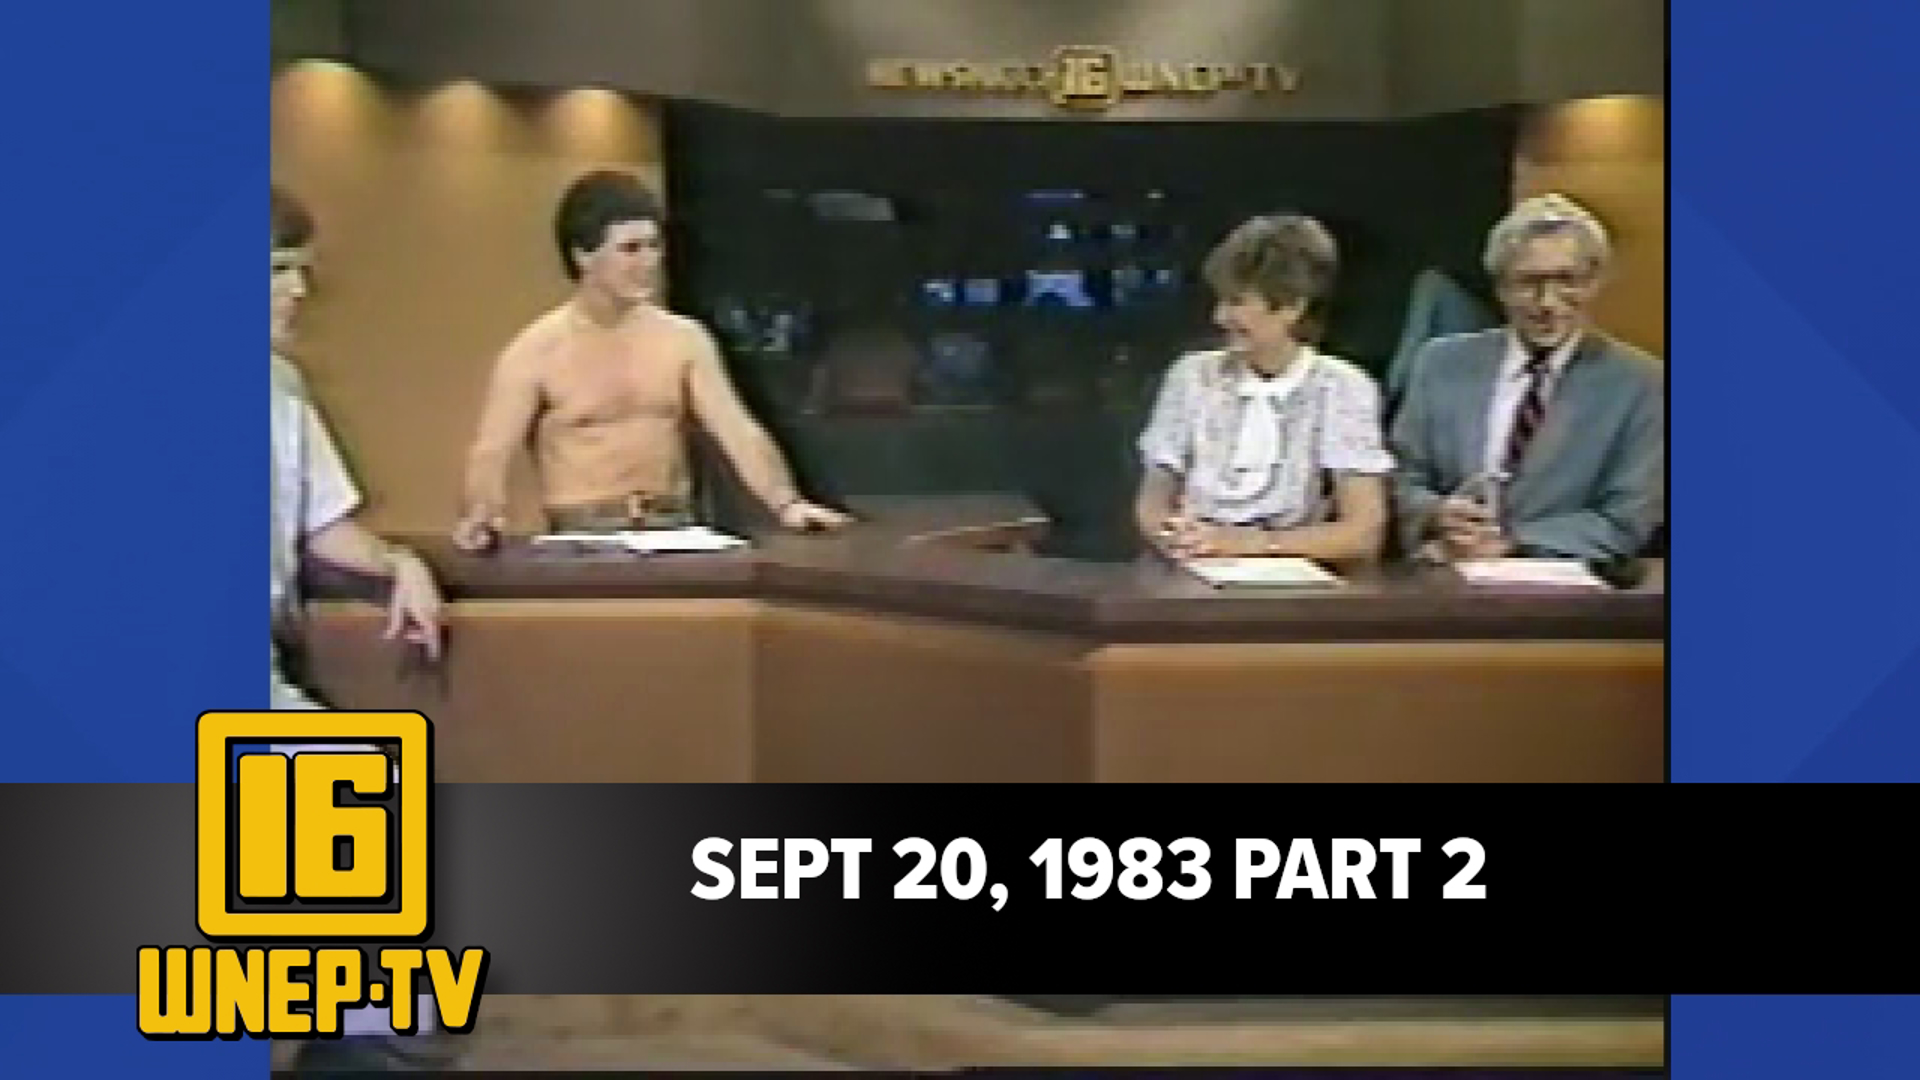 Watch Karen Harch and Nolan Johannes with curated stories from September 20, 1983. Warning: Joe Zone removes his shirt.